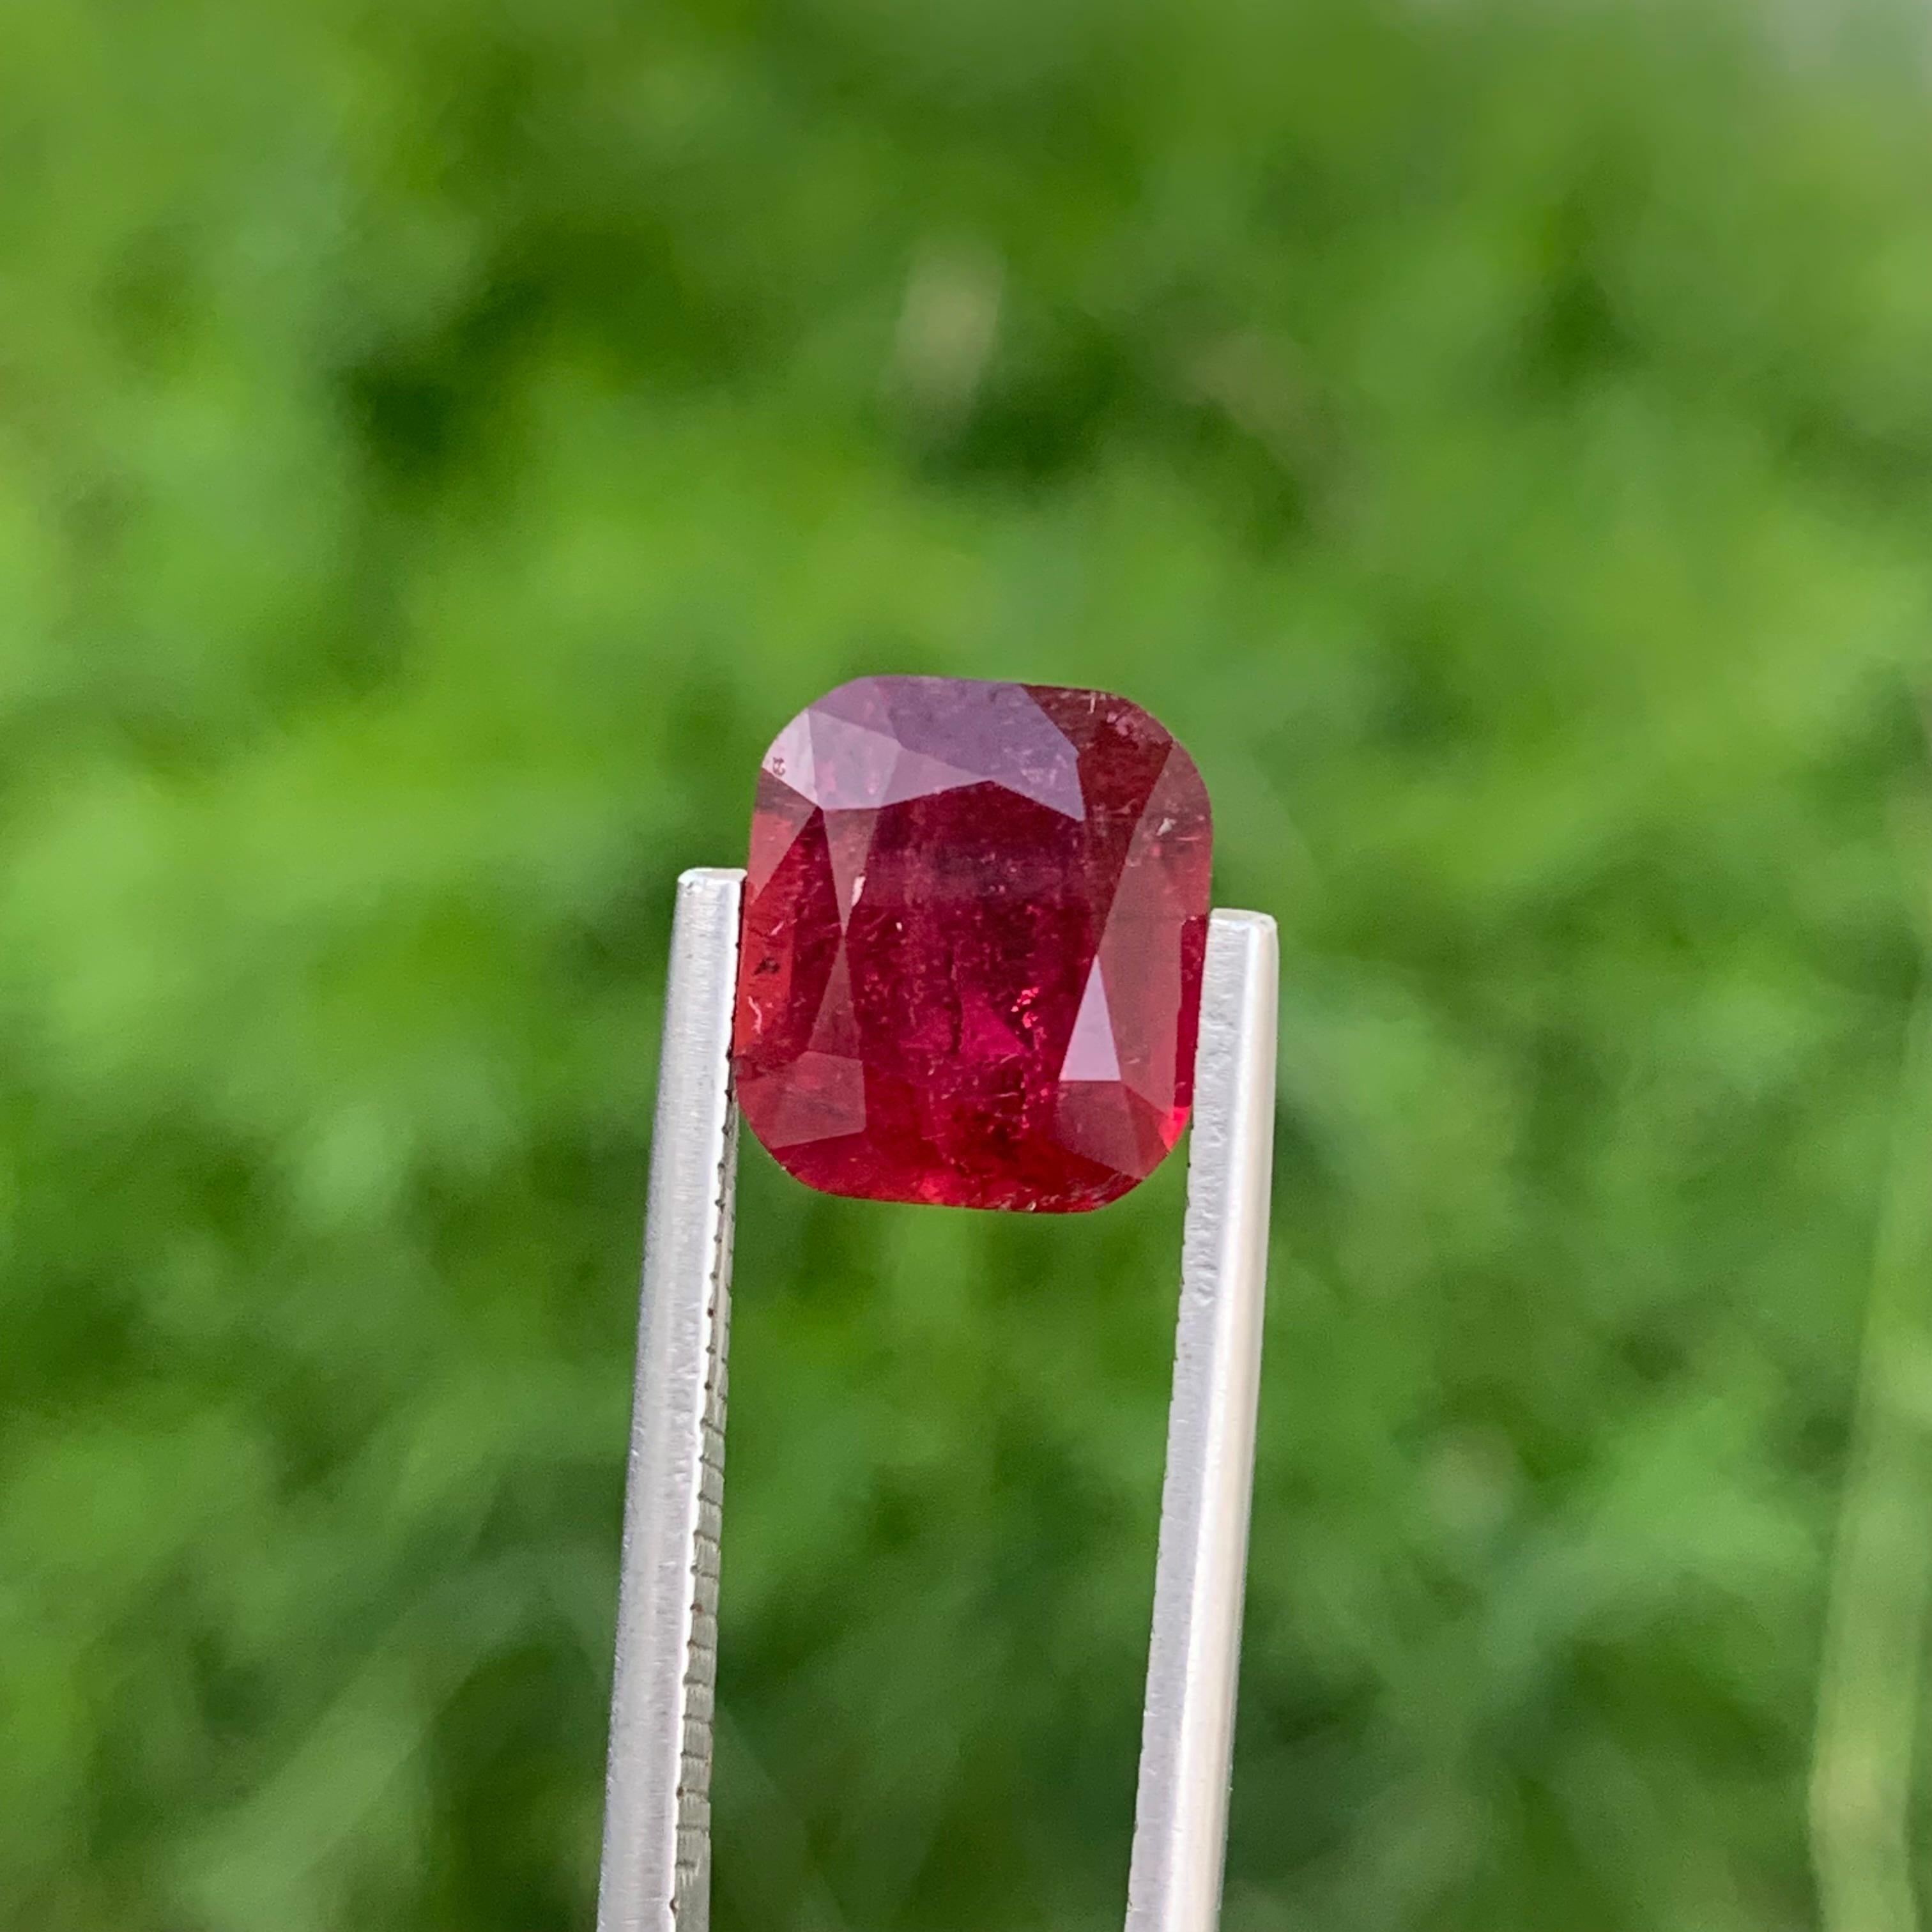 Loose Rubellite 
Weight: 3.95 Carats 
Dimension: 10.3x9.1x5.6 Mm
Origin: Africa
Shape: Cushion 
Color: Red 
Treatment: Non
Rubellite tourmaline is a remarkable and highly-prized variety of tourmaline, known for its vibrant and intense red or pink